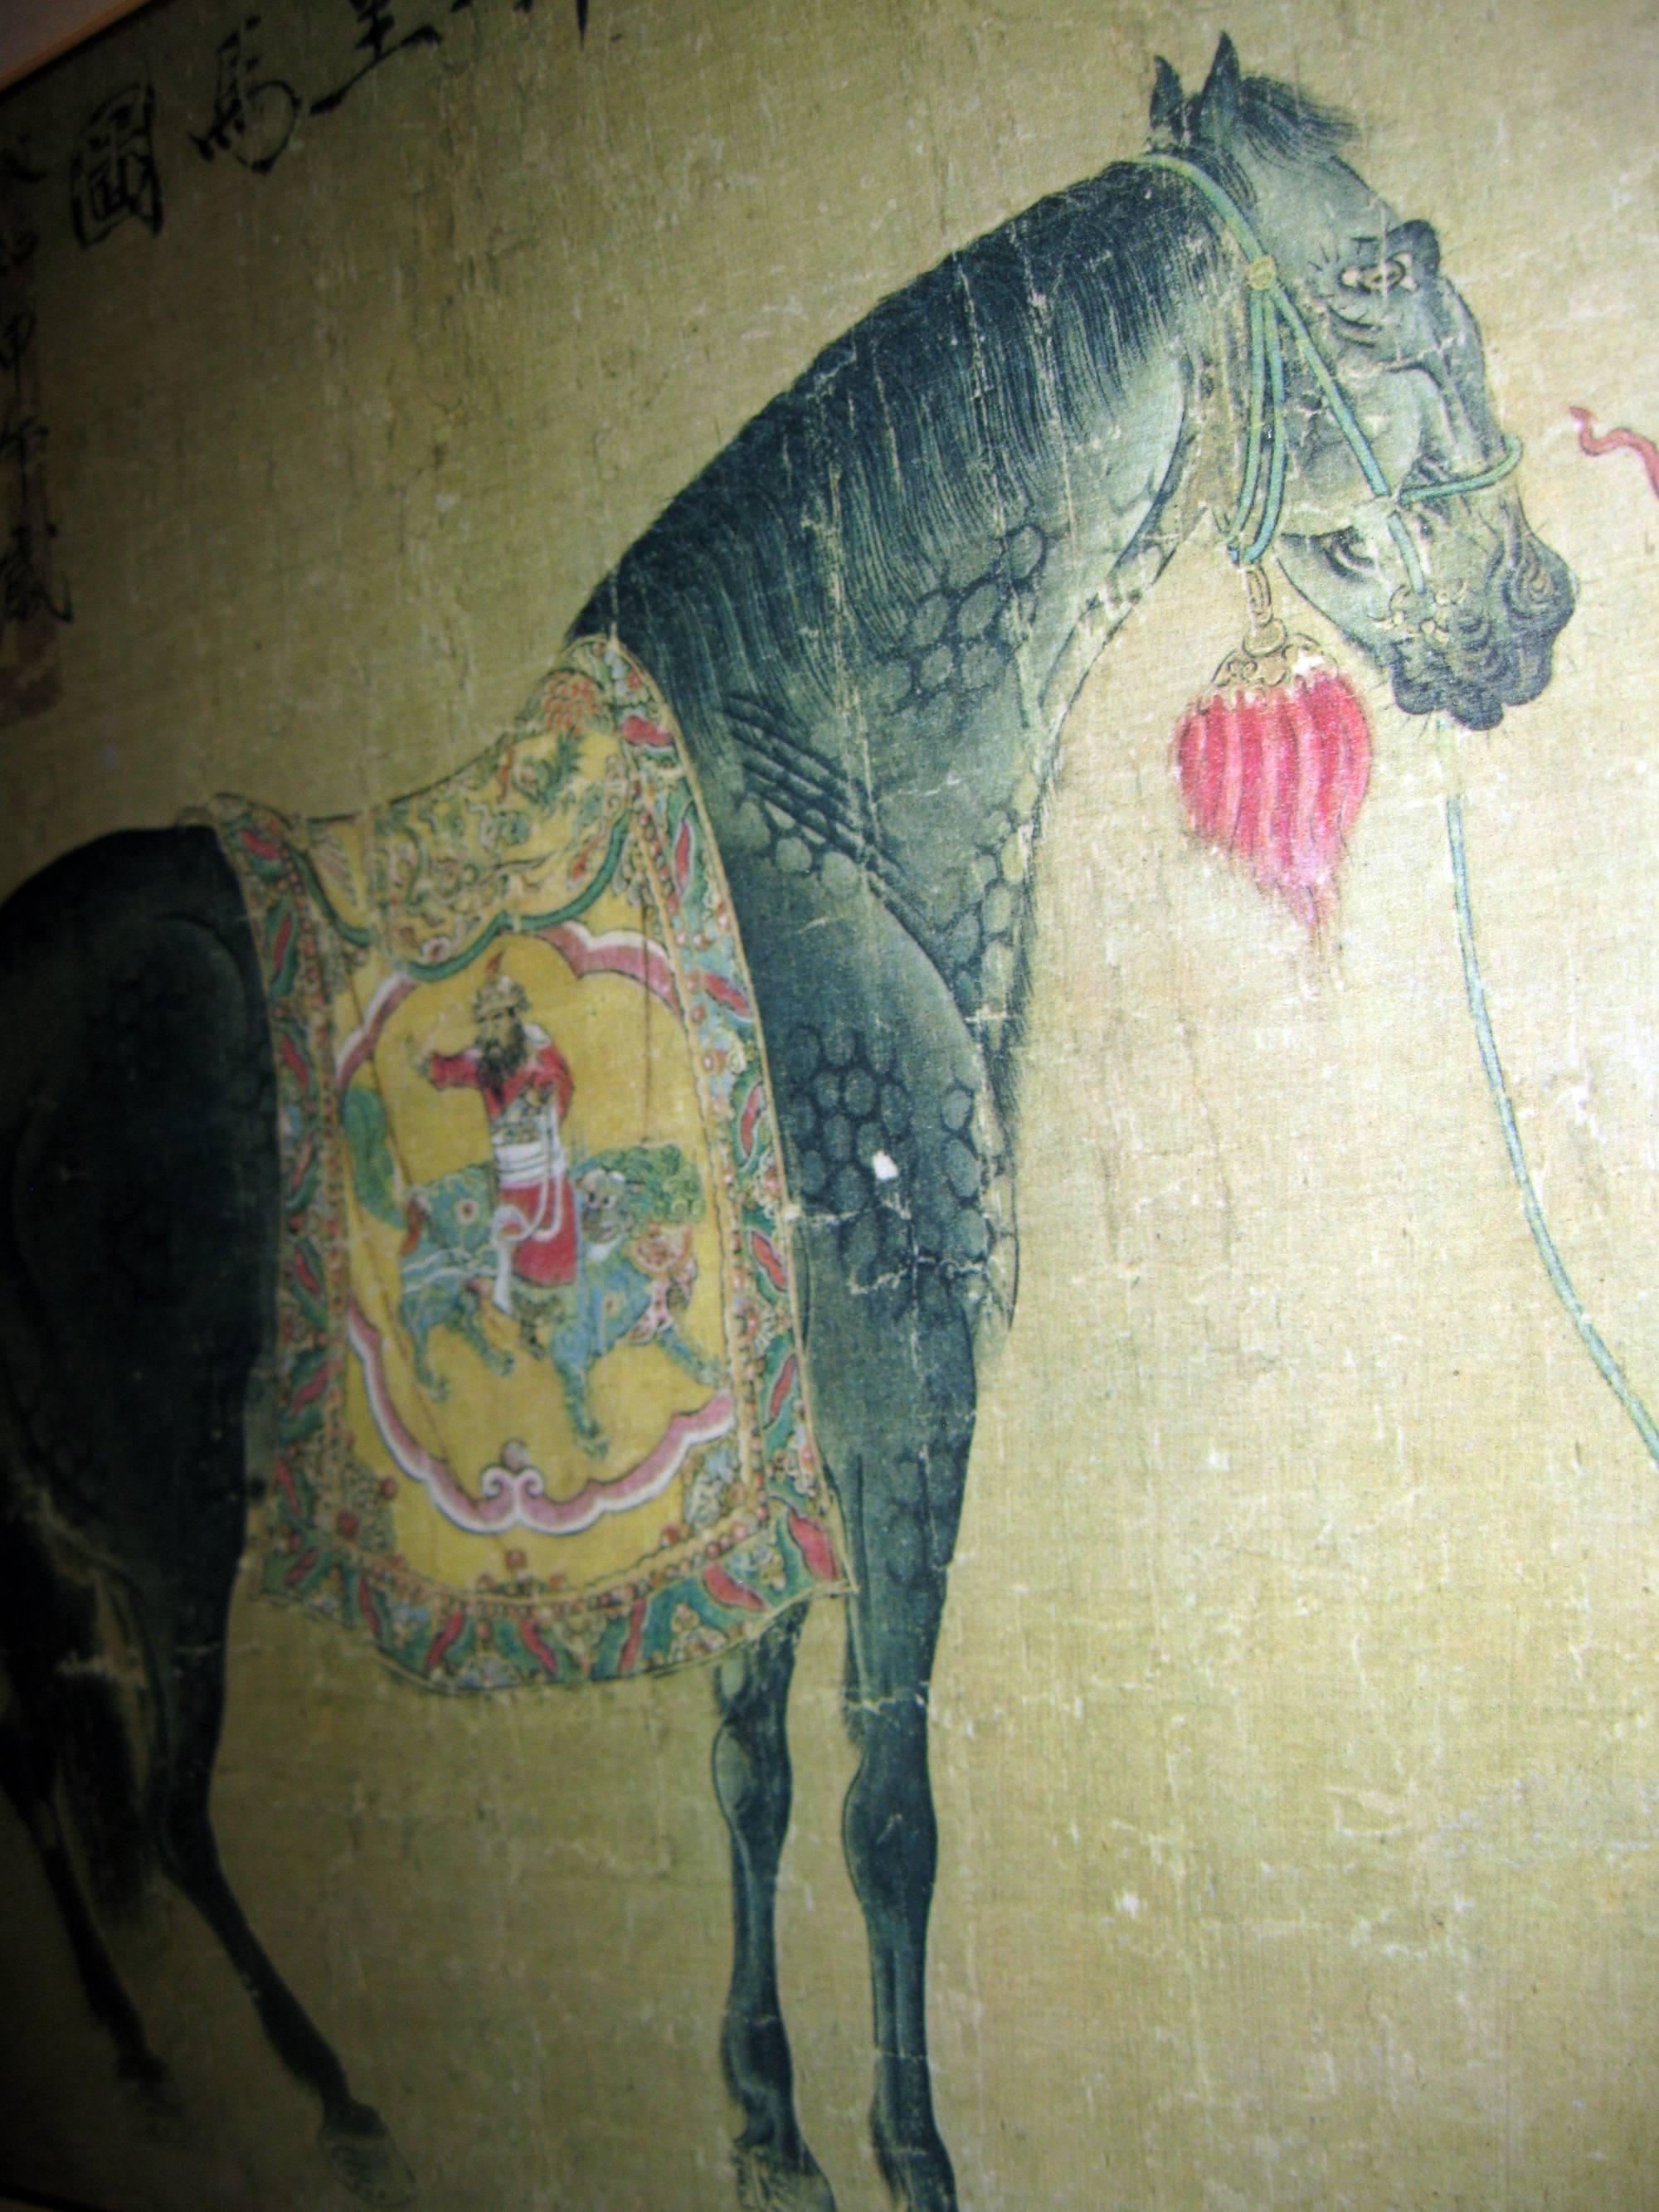 Chinese Framed Print of Tang Dynasty Painting In Good Condition For Sale In Savannah, GA